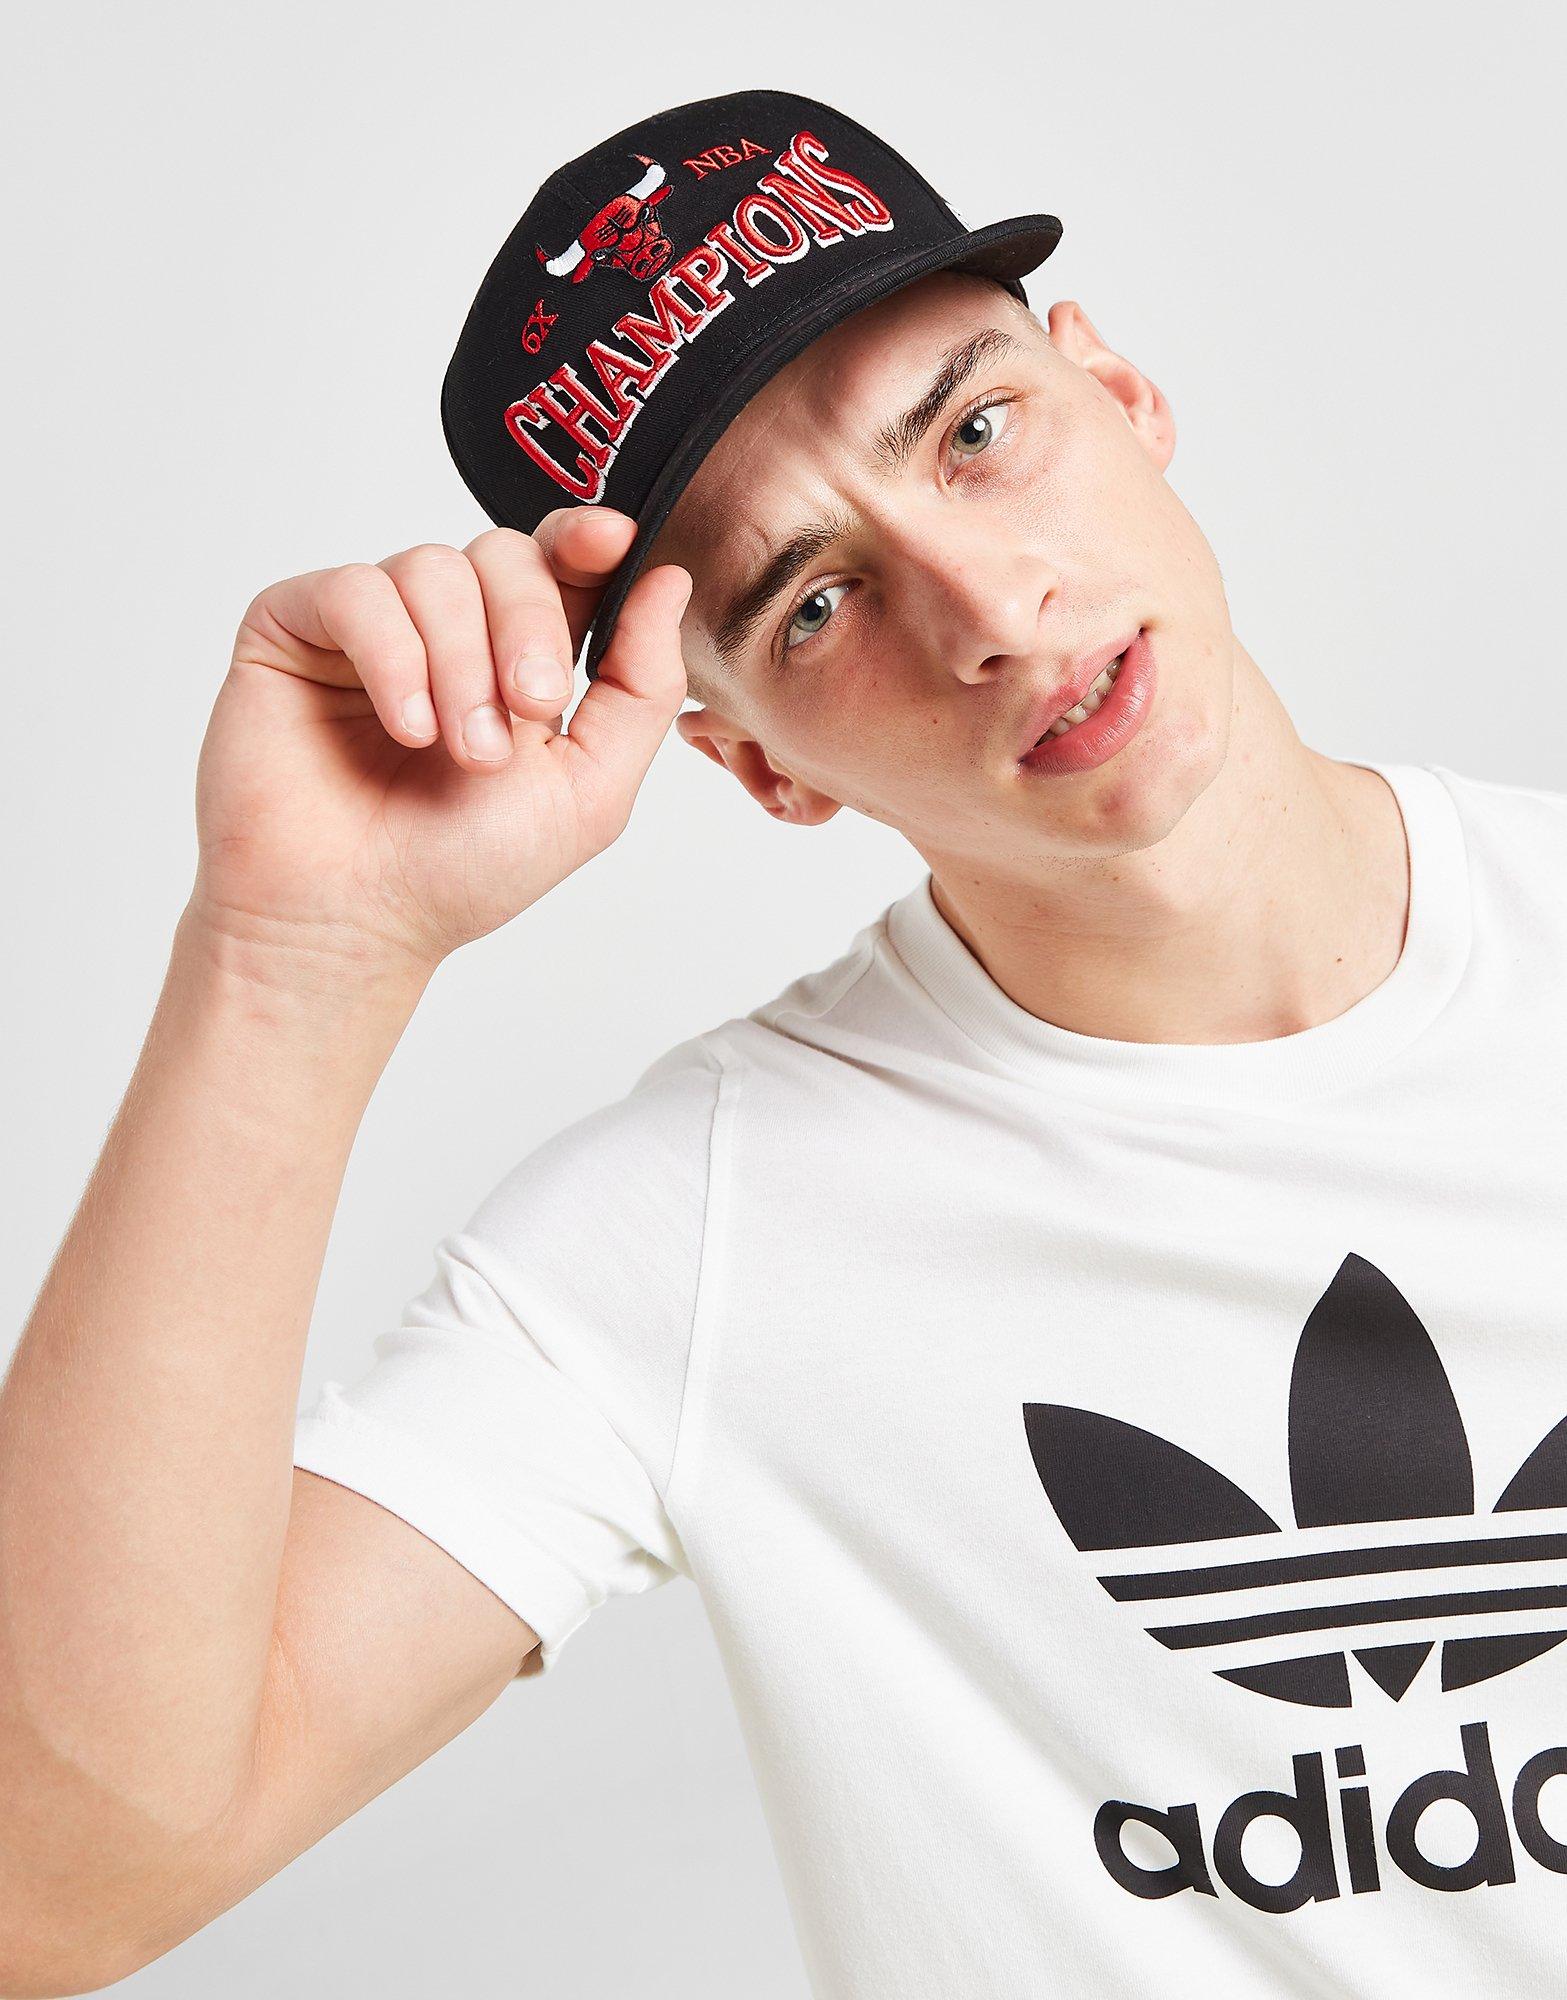 Bulls '1996 CHAMPIONS REPLICA SNAPBACK' Hat by Mitchell and Ness